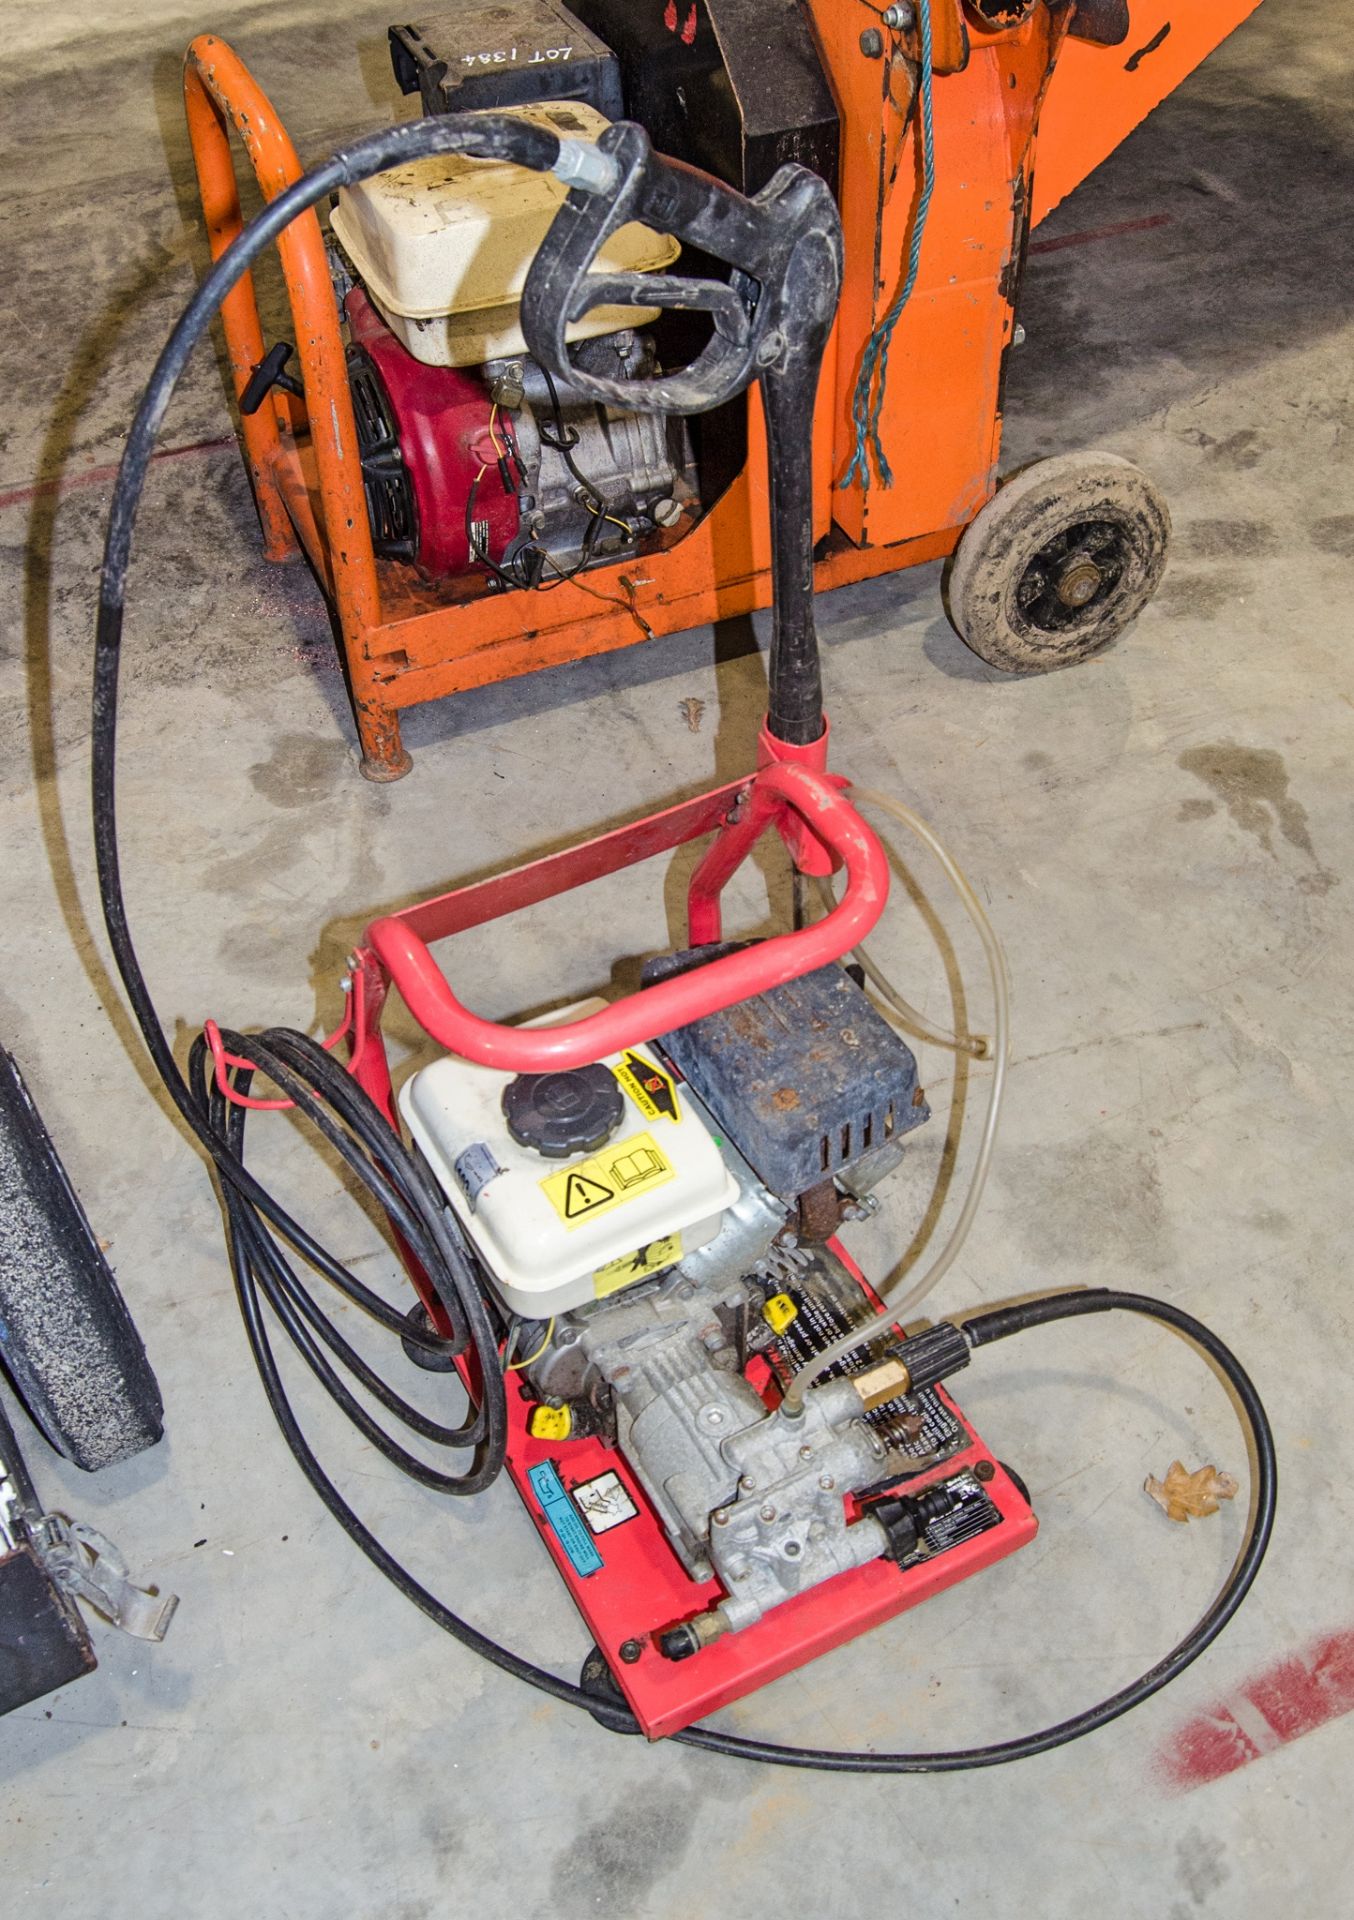 Sealey PCM1300 petrol driven pressure washer c/w lance ** No VAT on hammer but VAT will be charged - Image 2 of 2